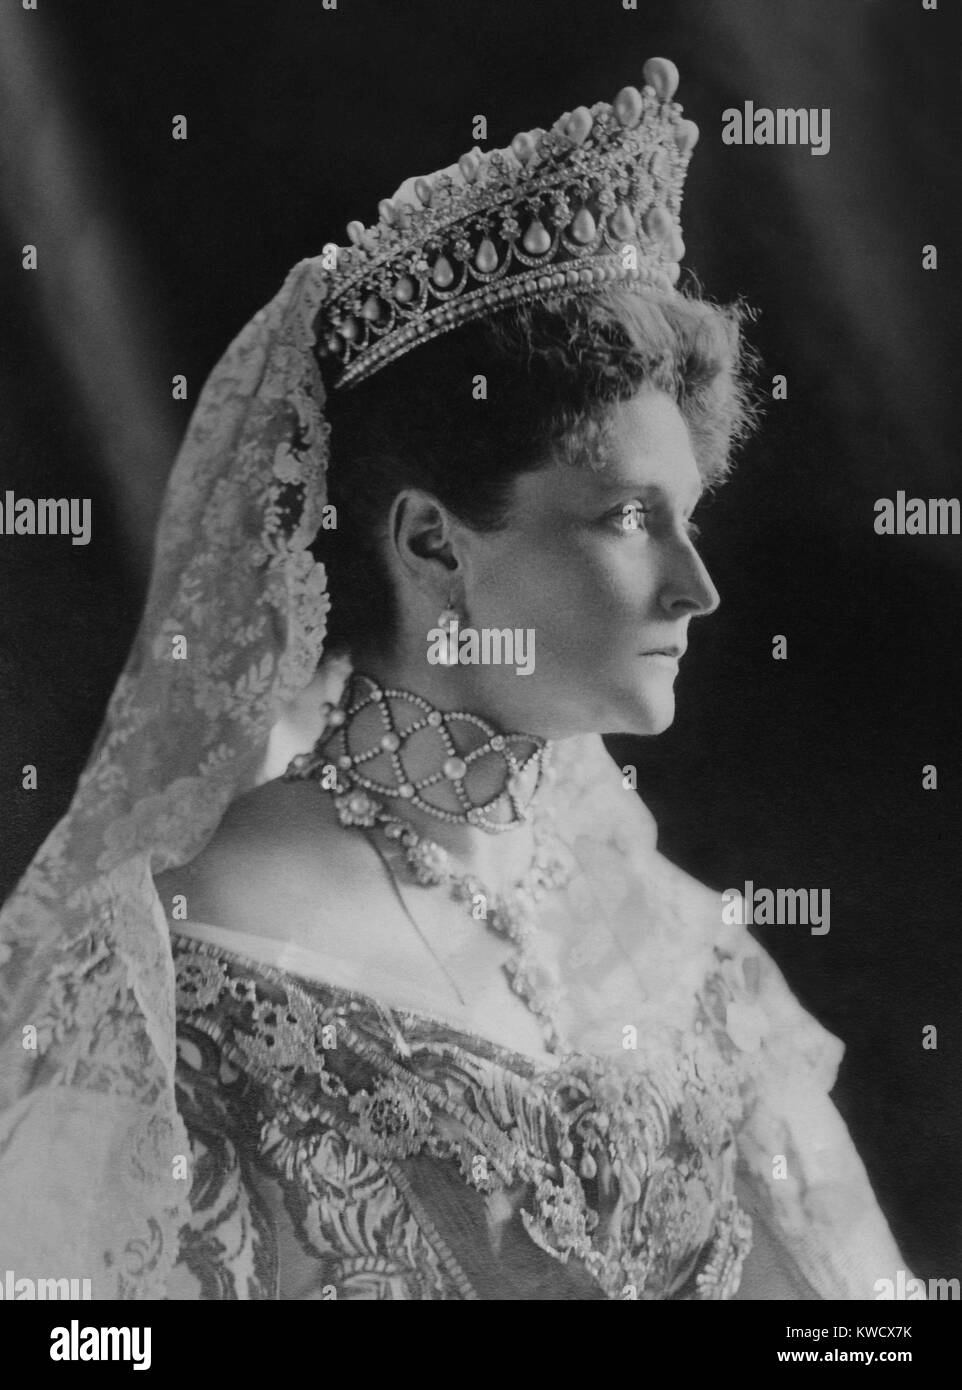 Czarina Alexandra Feodorovna, Alix of Hesse, the Empress Consort of Russia, 1908. She was the wife of the last Czar of Russia, Nicholas II (BSLOC 2017 2 6) Stock Photo